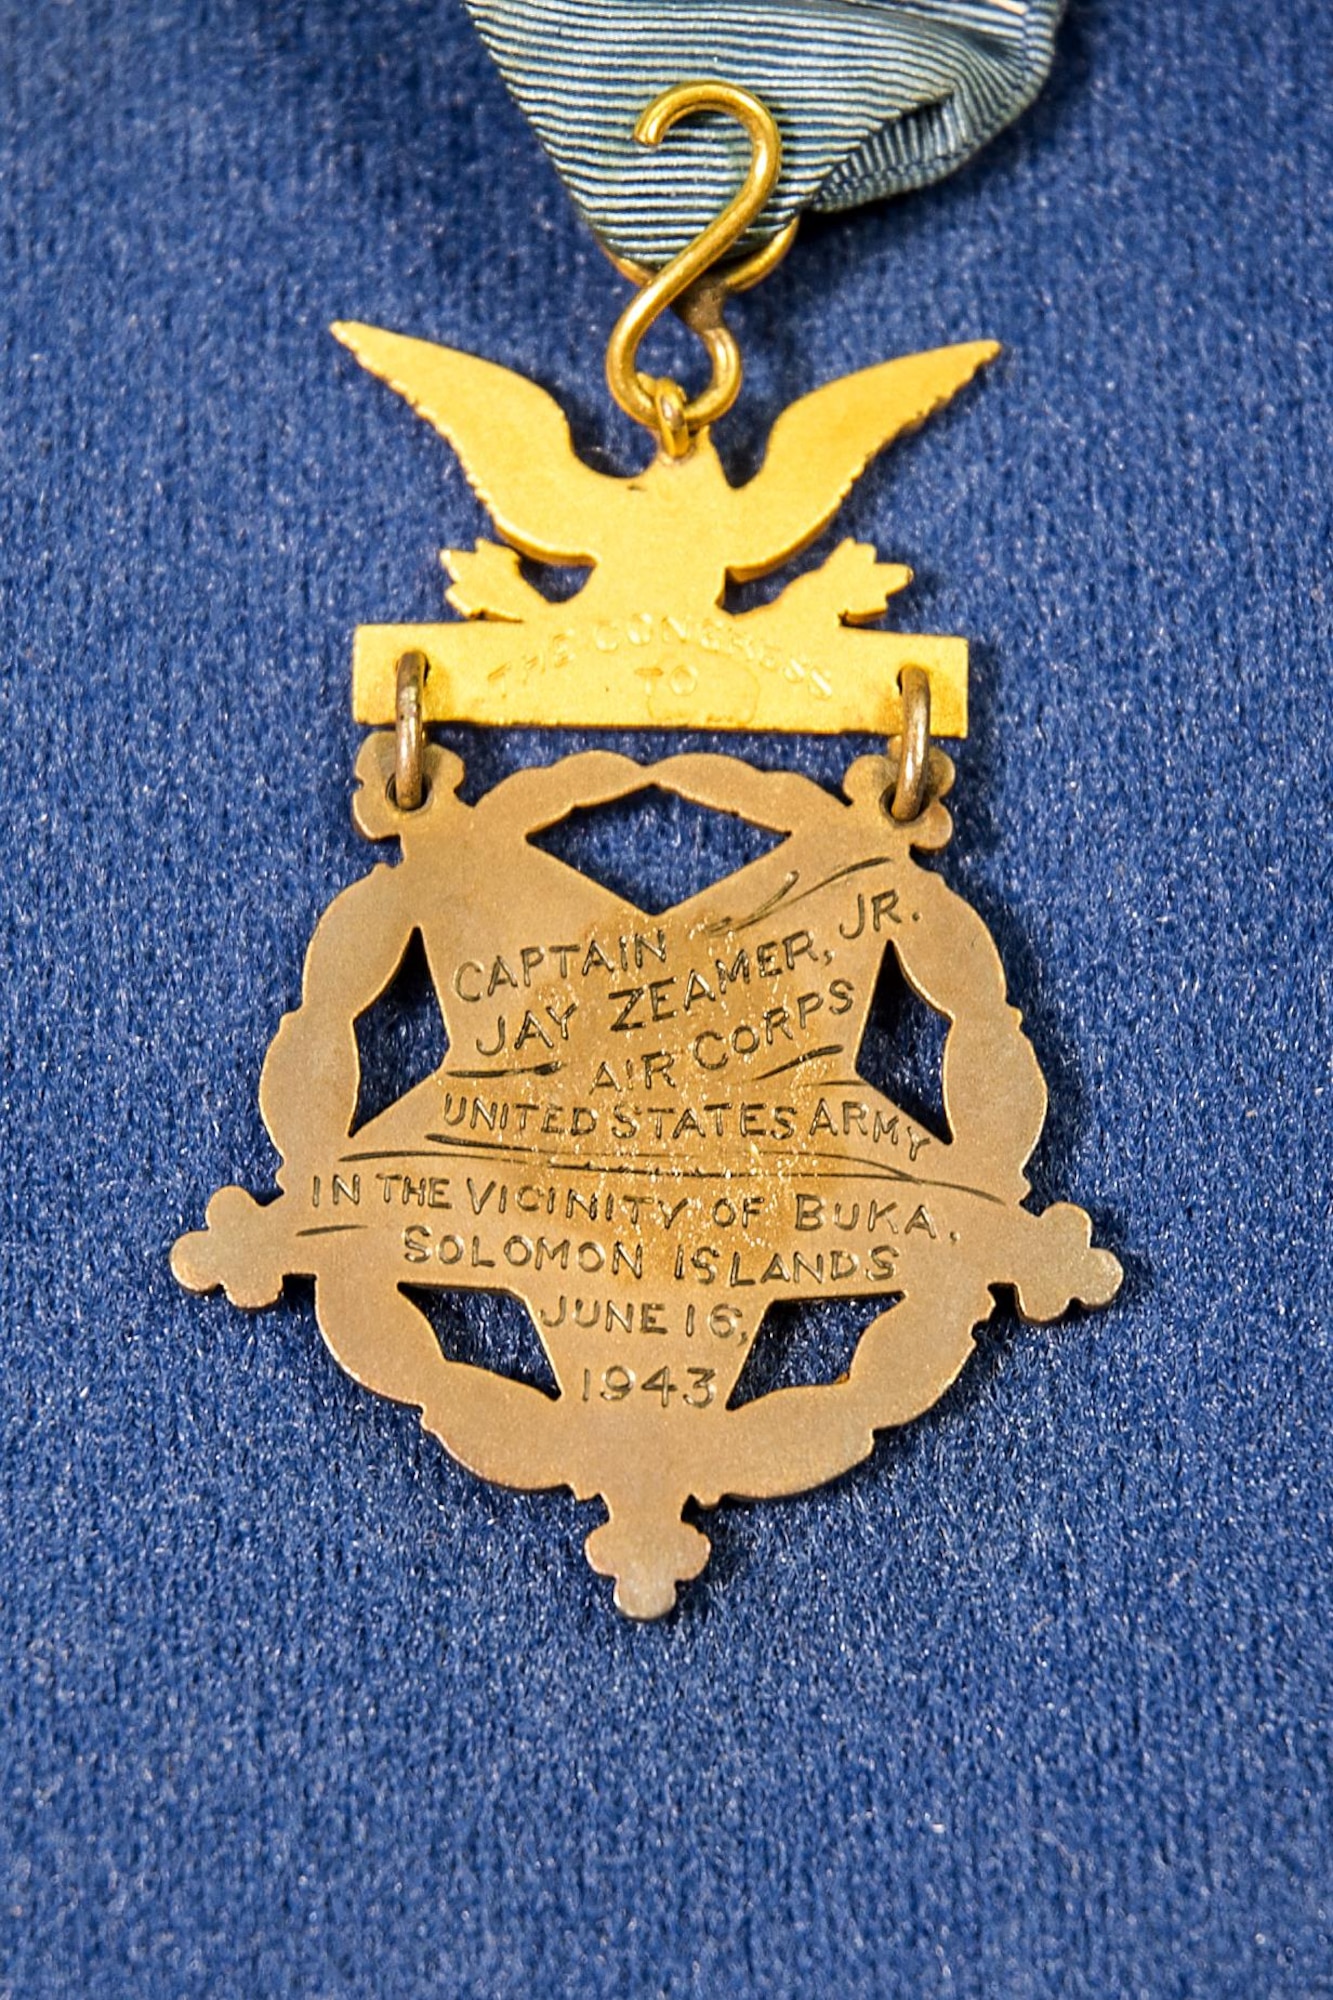 DAYTON, Ohio -- Rear side of Capt. Jay Zeamer's Medal of Honor on display in the WWII Gallery at the National Museum of the U.S. Air Force. The Medal of Honor is the highest award for valor in action against an enemy force which can be bestowed upon an individual serving in the Armed Services of the United States.  Zeamer's remarkable B-17 crew was the most highly-decorated aircrew in history. Zeamer and the bombardier, 2nd Lt. Joseph Sarnoski, received the Medal of Honor, while seven other members of the crew were awarded the Distinguished Service Cross, the Nation's second highest honor. Nearly all received the Purple Heart for wounds sustained in combat. (U.S. Air Force photo by Ken LaRock)